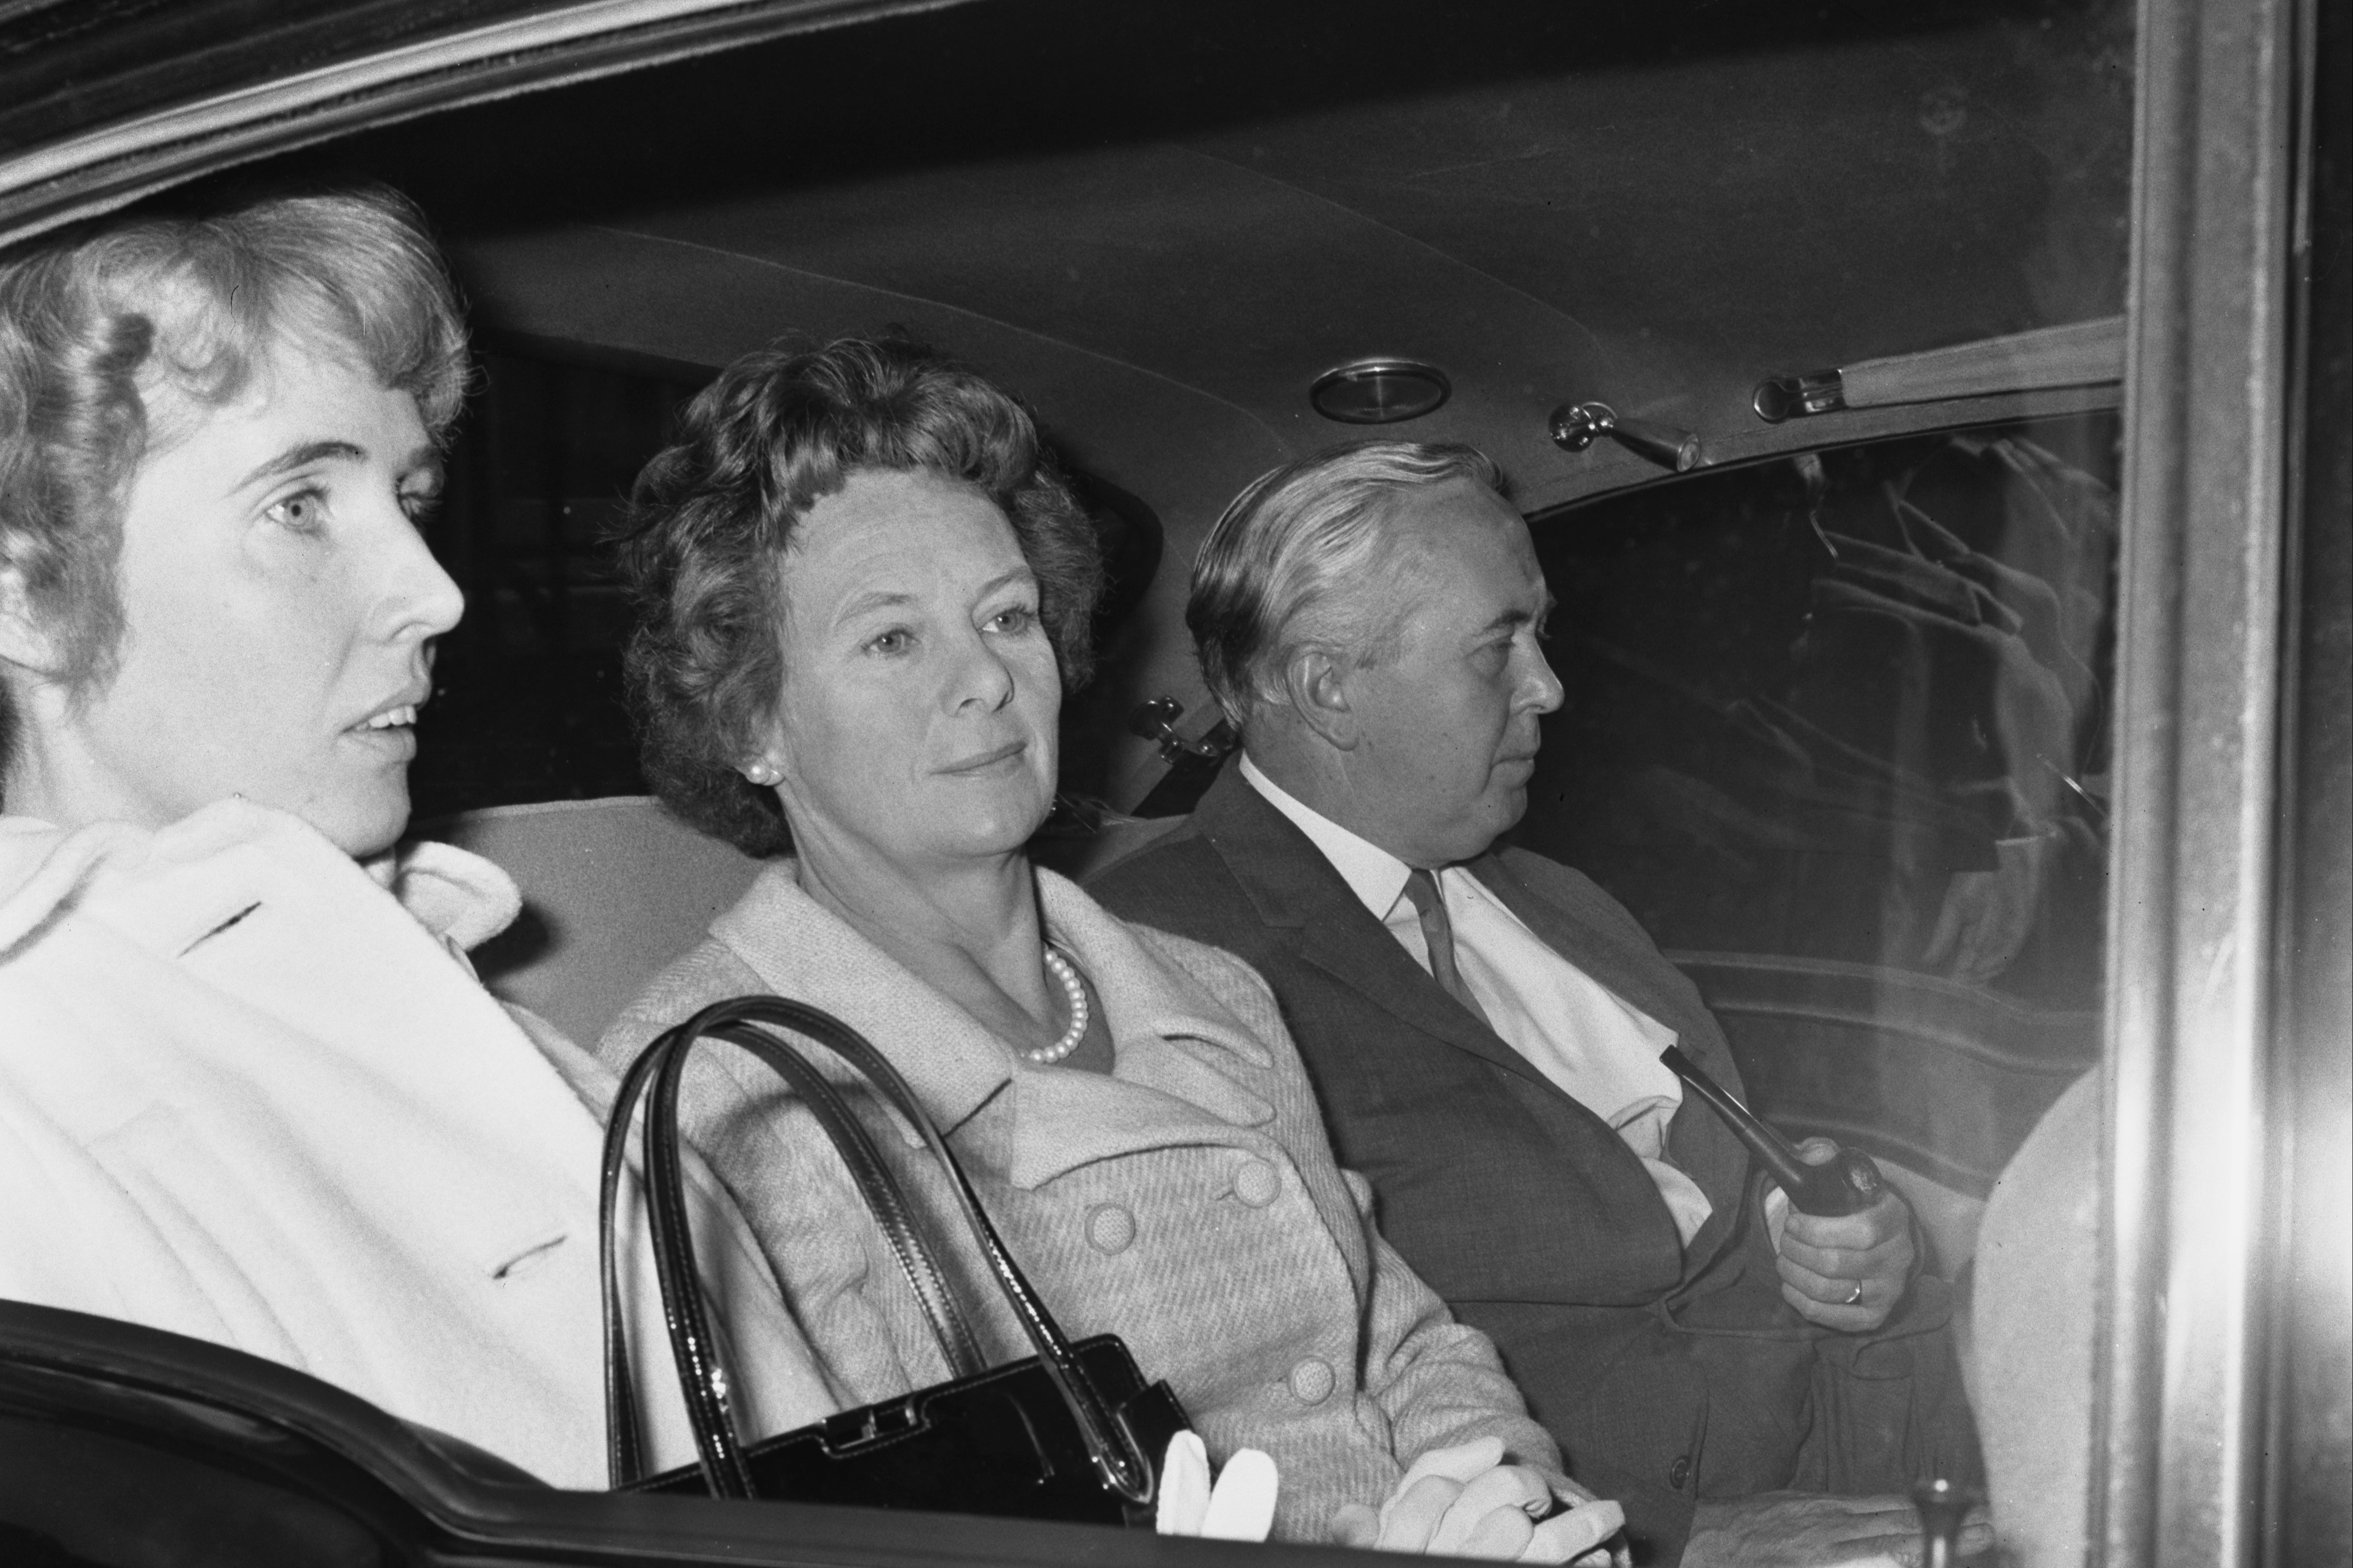 The former PM with his wife (centre) and secretary Marcia Williams, with whom he allegedly had an affair